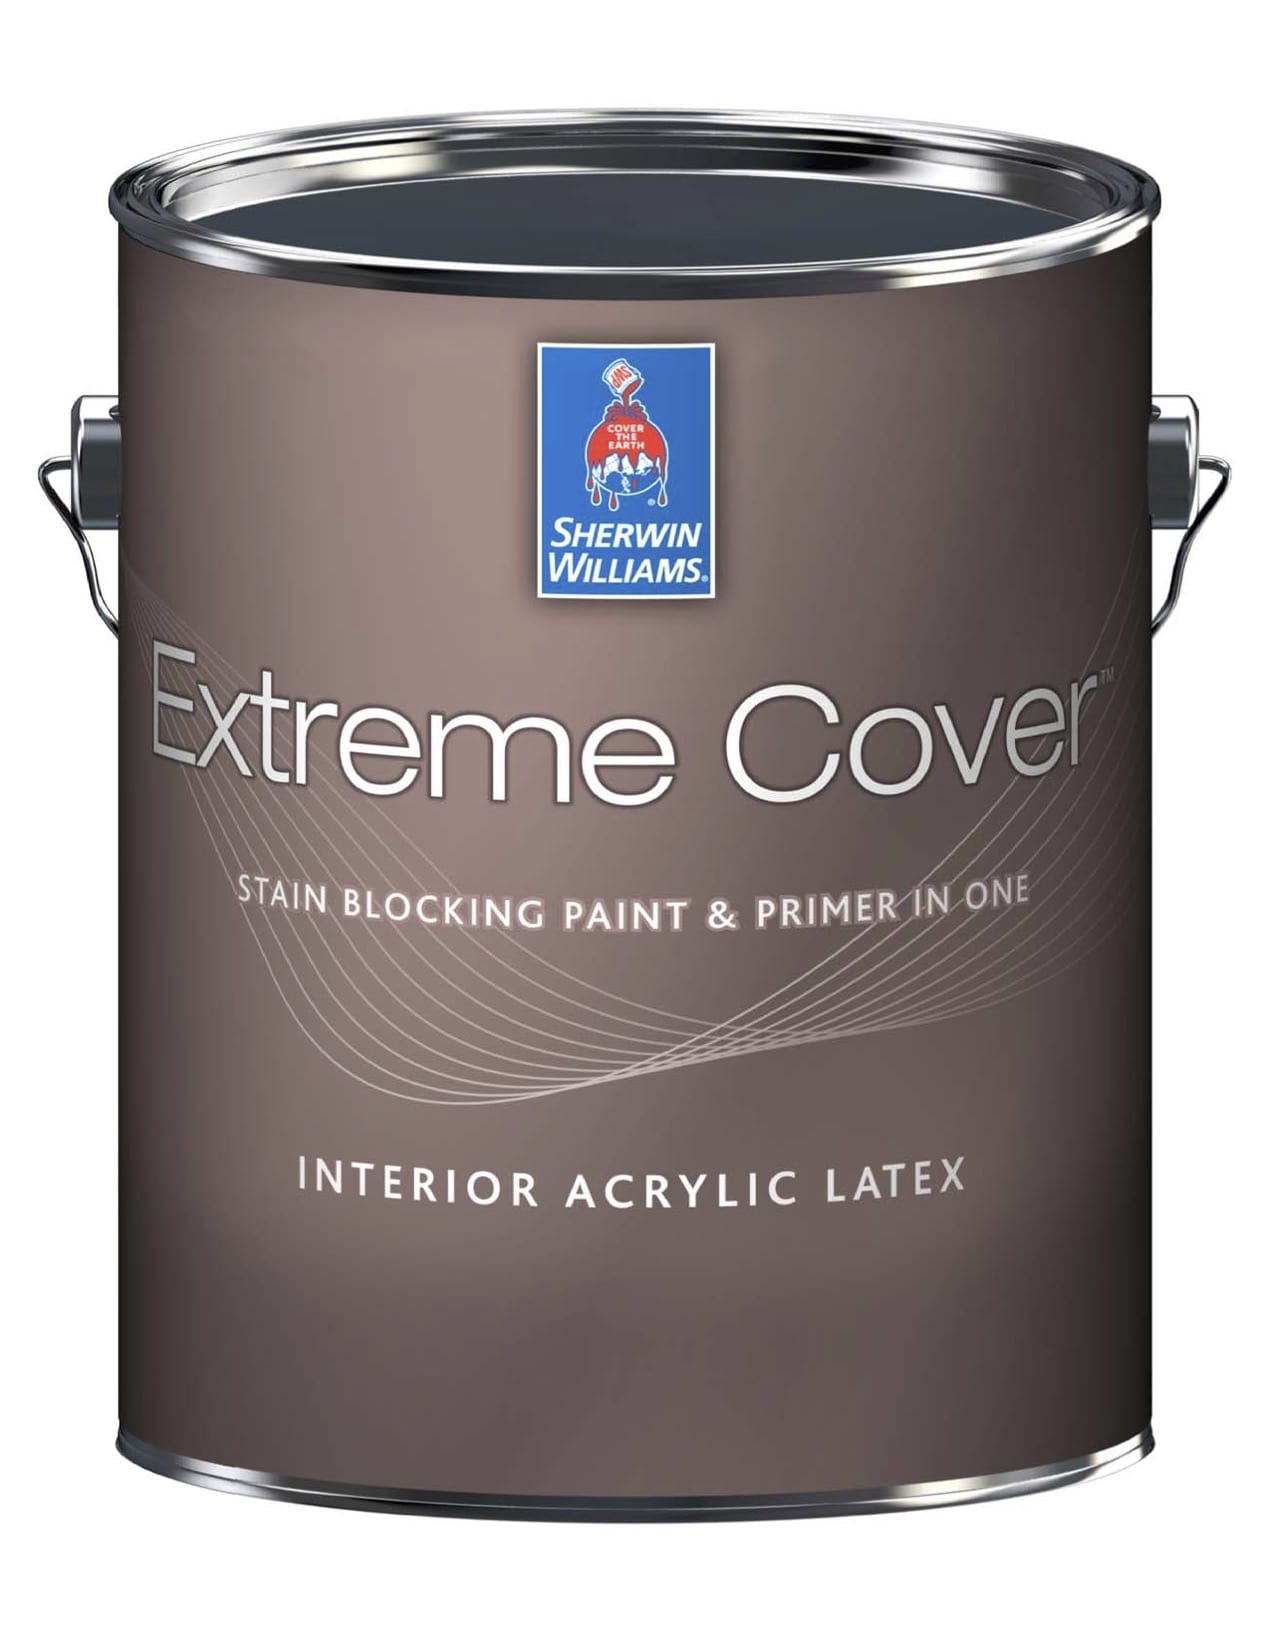 SHERWIN-WILLIAMS INTRODUCES EXTREME COVER™